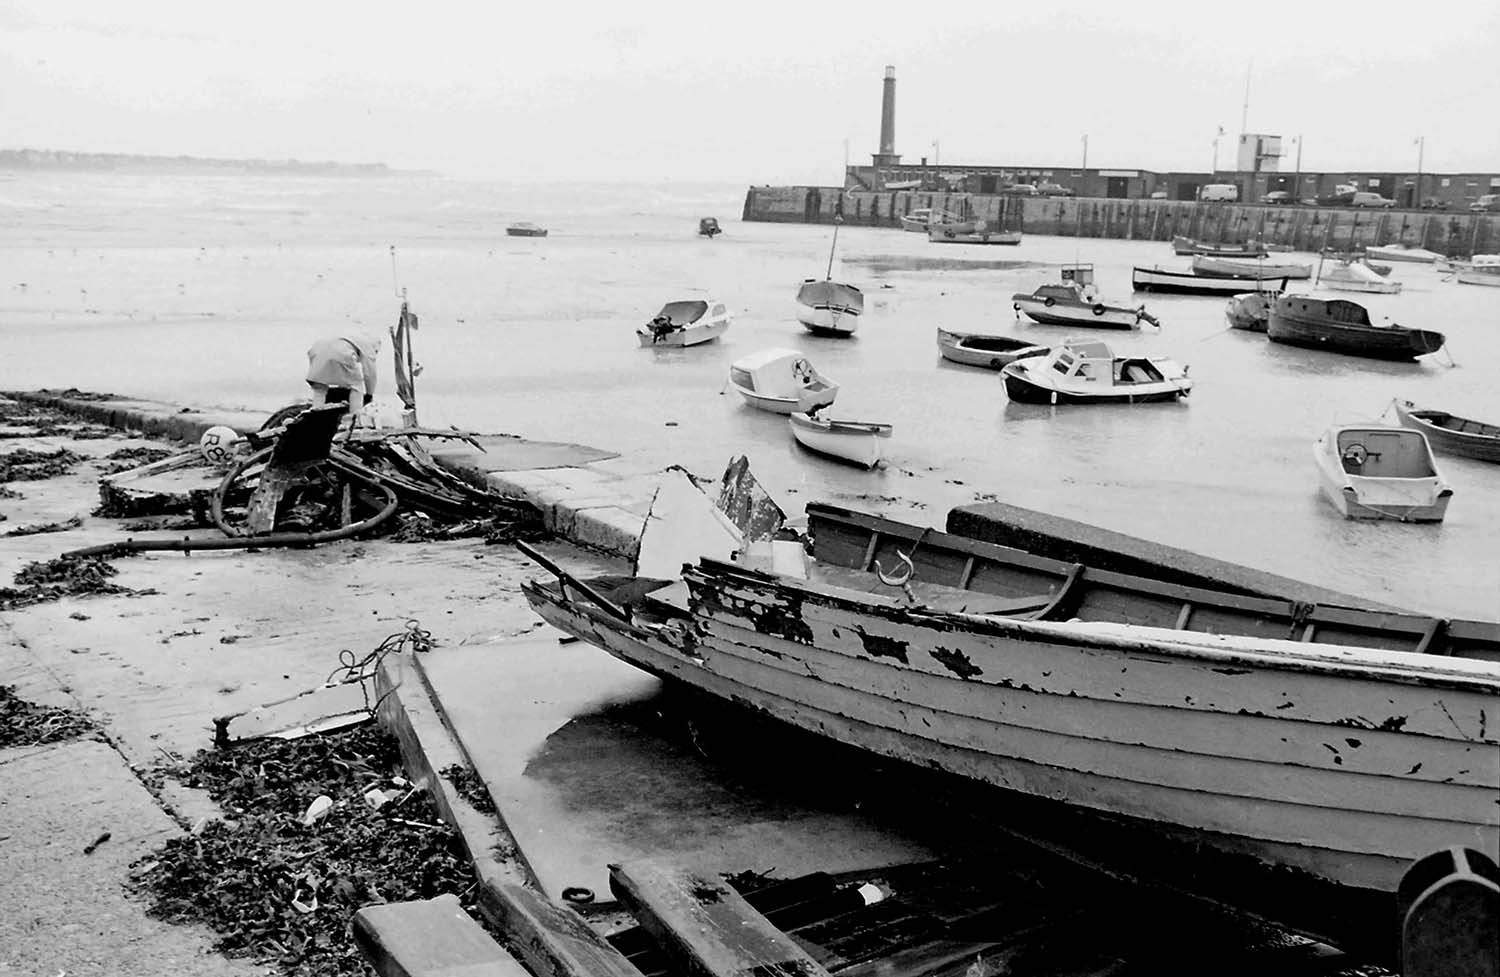 Harbour, Wrecked Boats  1977 